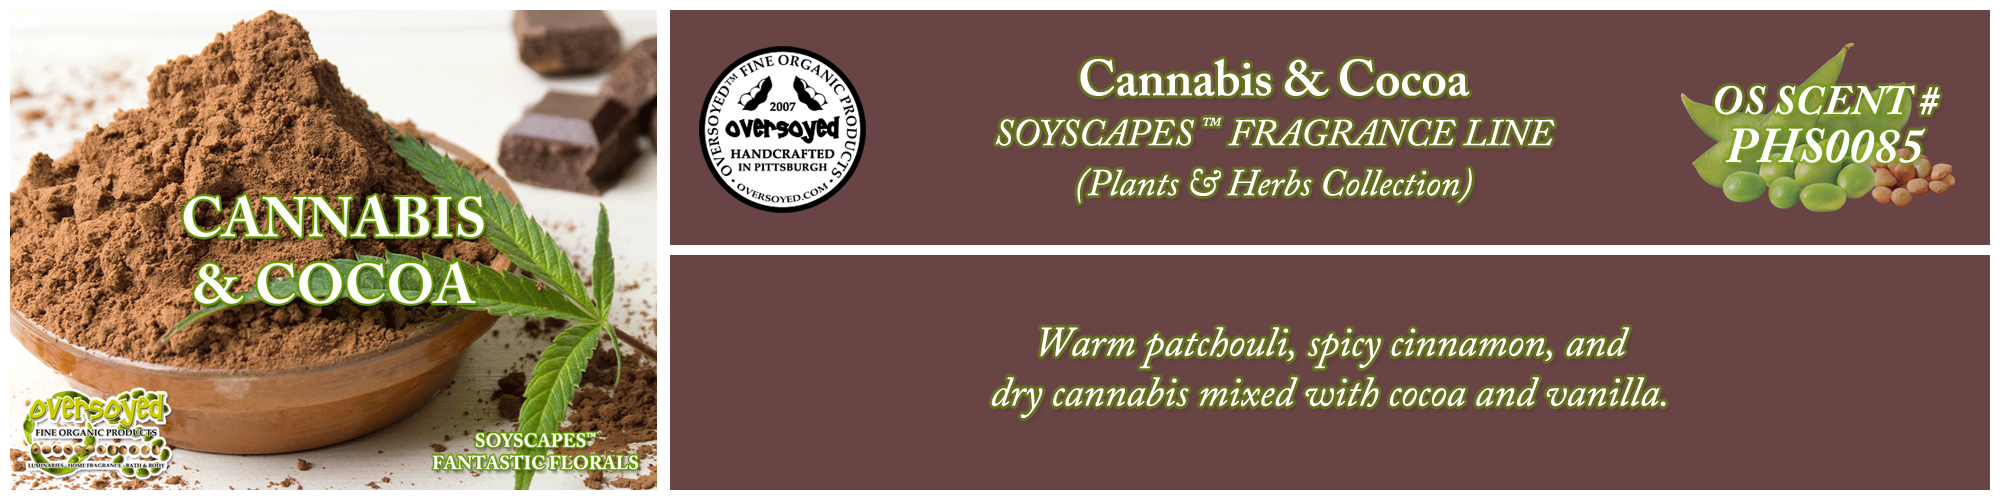 Cannabis & Cocoa Handcrafted Products Collection